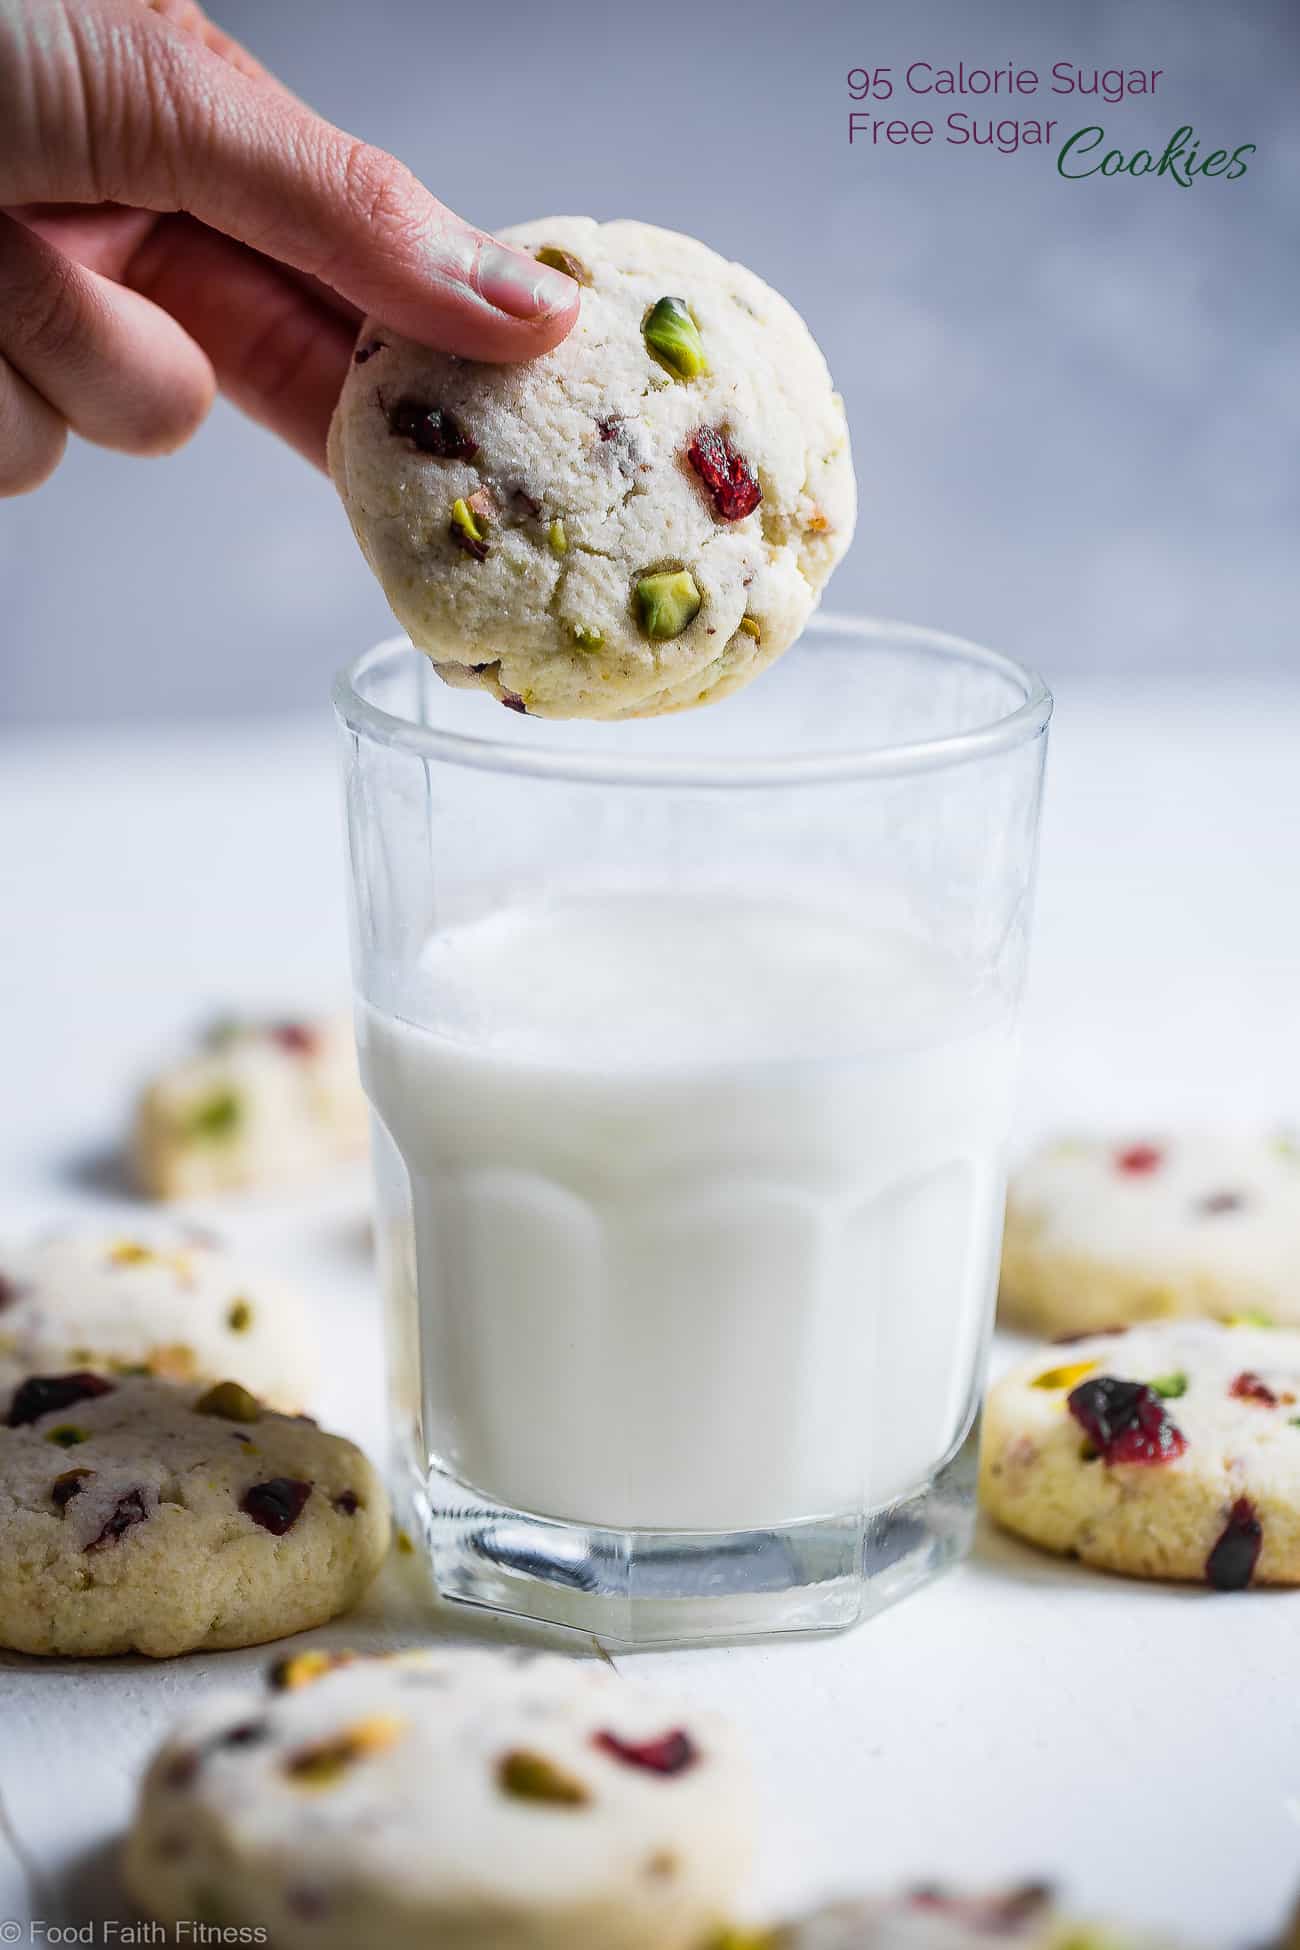 Gluten Free Sugar Free Sugar Cookies - These quick and easy, CHEWY sugar free sugar cookies have tangy and crunchy cranberries and pistachios! They're a healthier Christmas treat for only 95 calories! | #Foodfaithfitness | #Glutenfree #Sugarfree #Lowcarb #Healthy #Sugarcookies